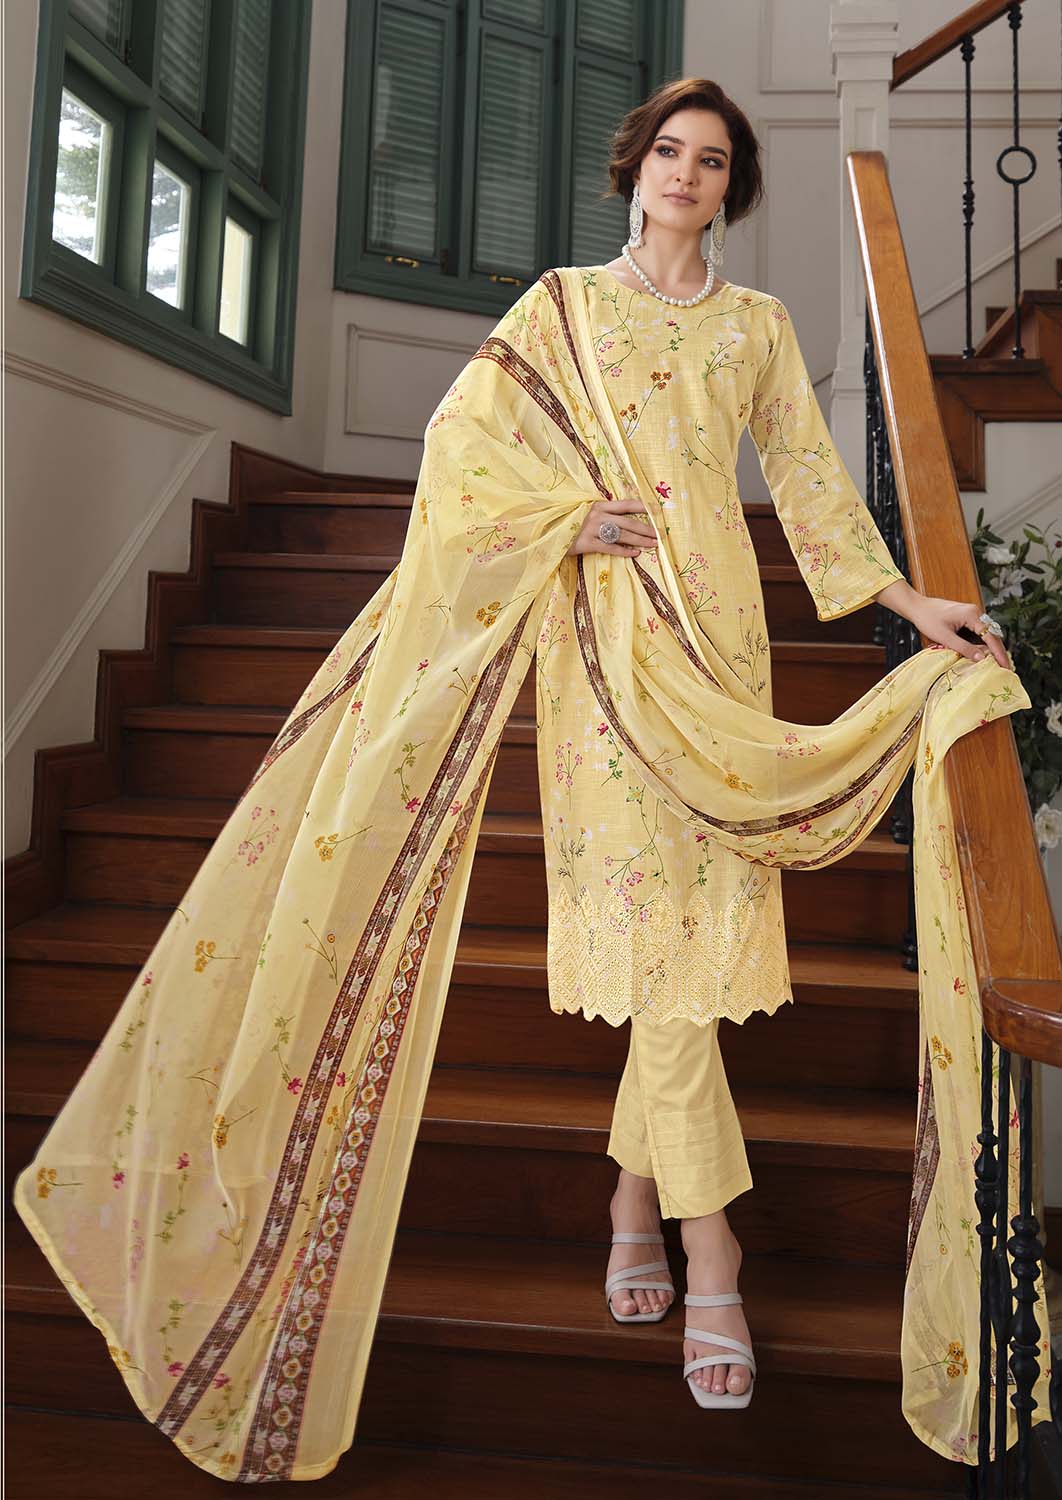 Belliza Cotton Linen Embroidered Unstitched Suit Set Yellow Belliza